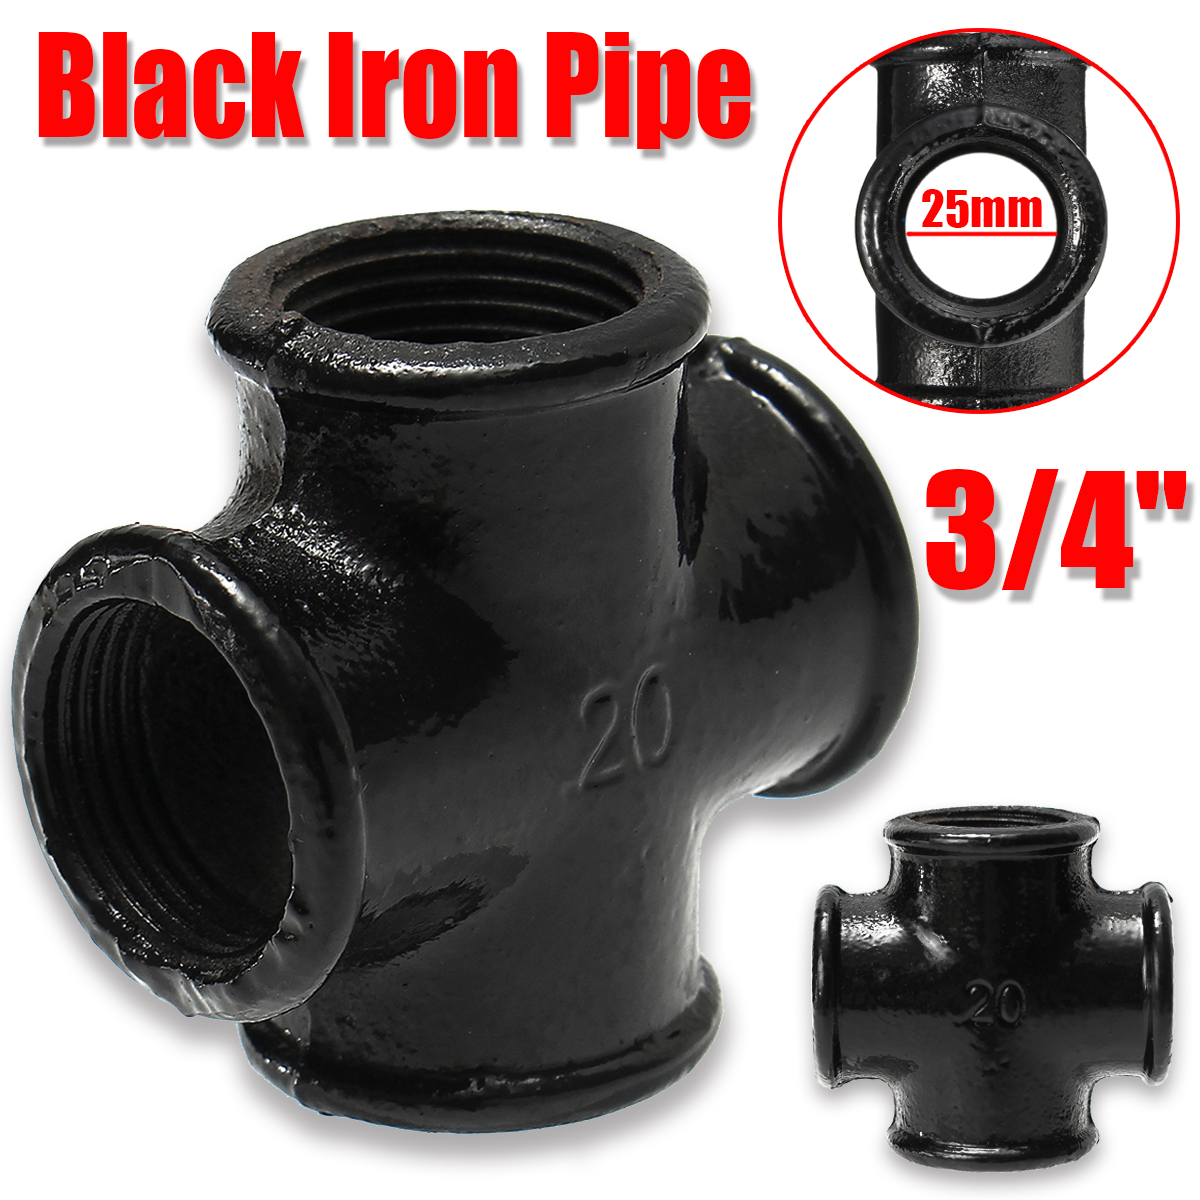 34-Inch-Black-Iron-Pipe-Threaded-Cross-Fitting-Plumbing-Malleable-Cross-Pipes-Fittings-1334049-1